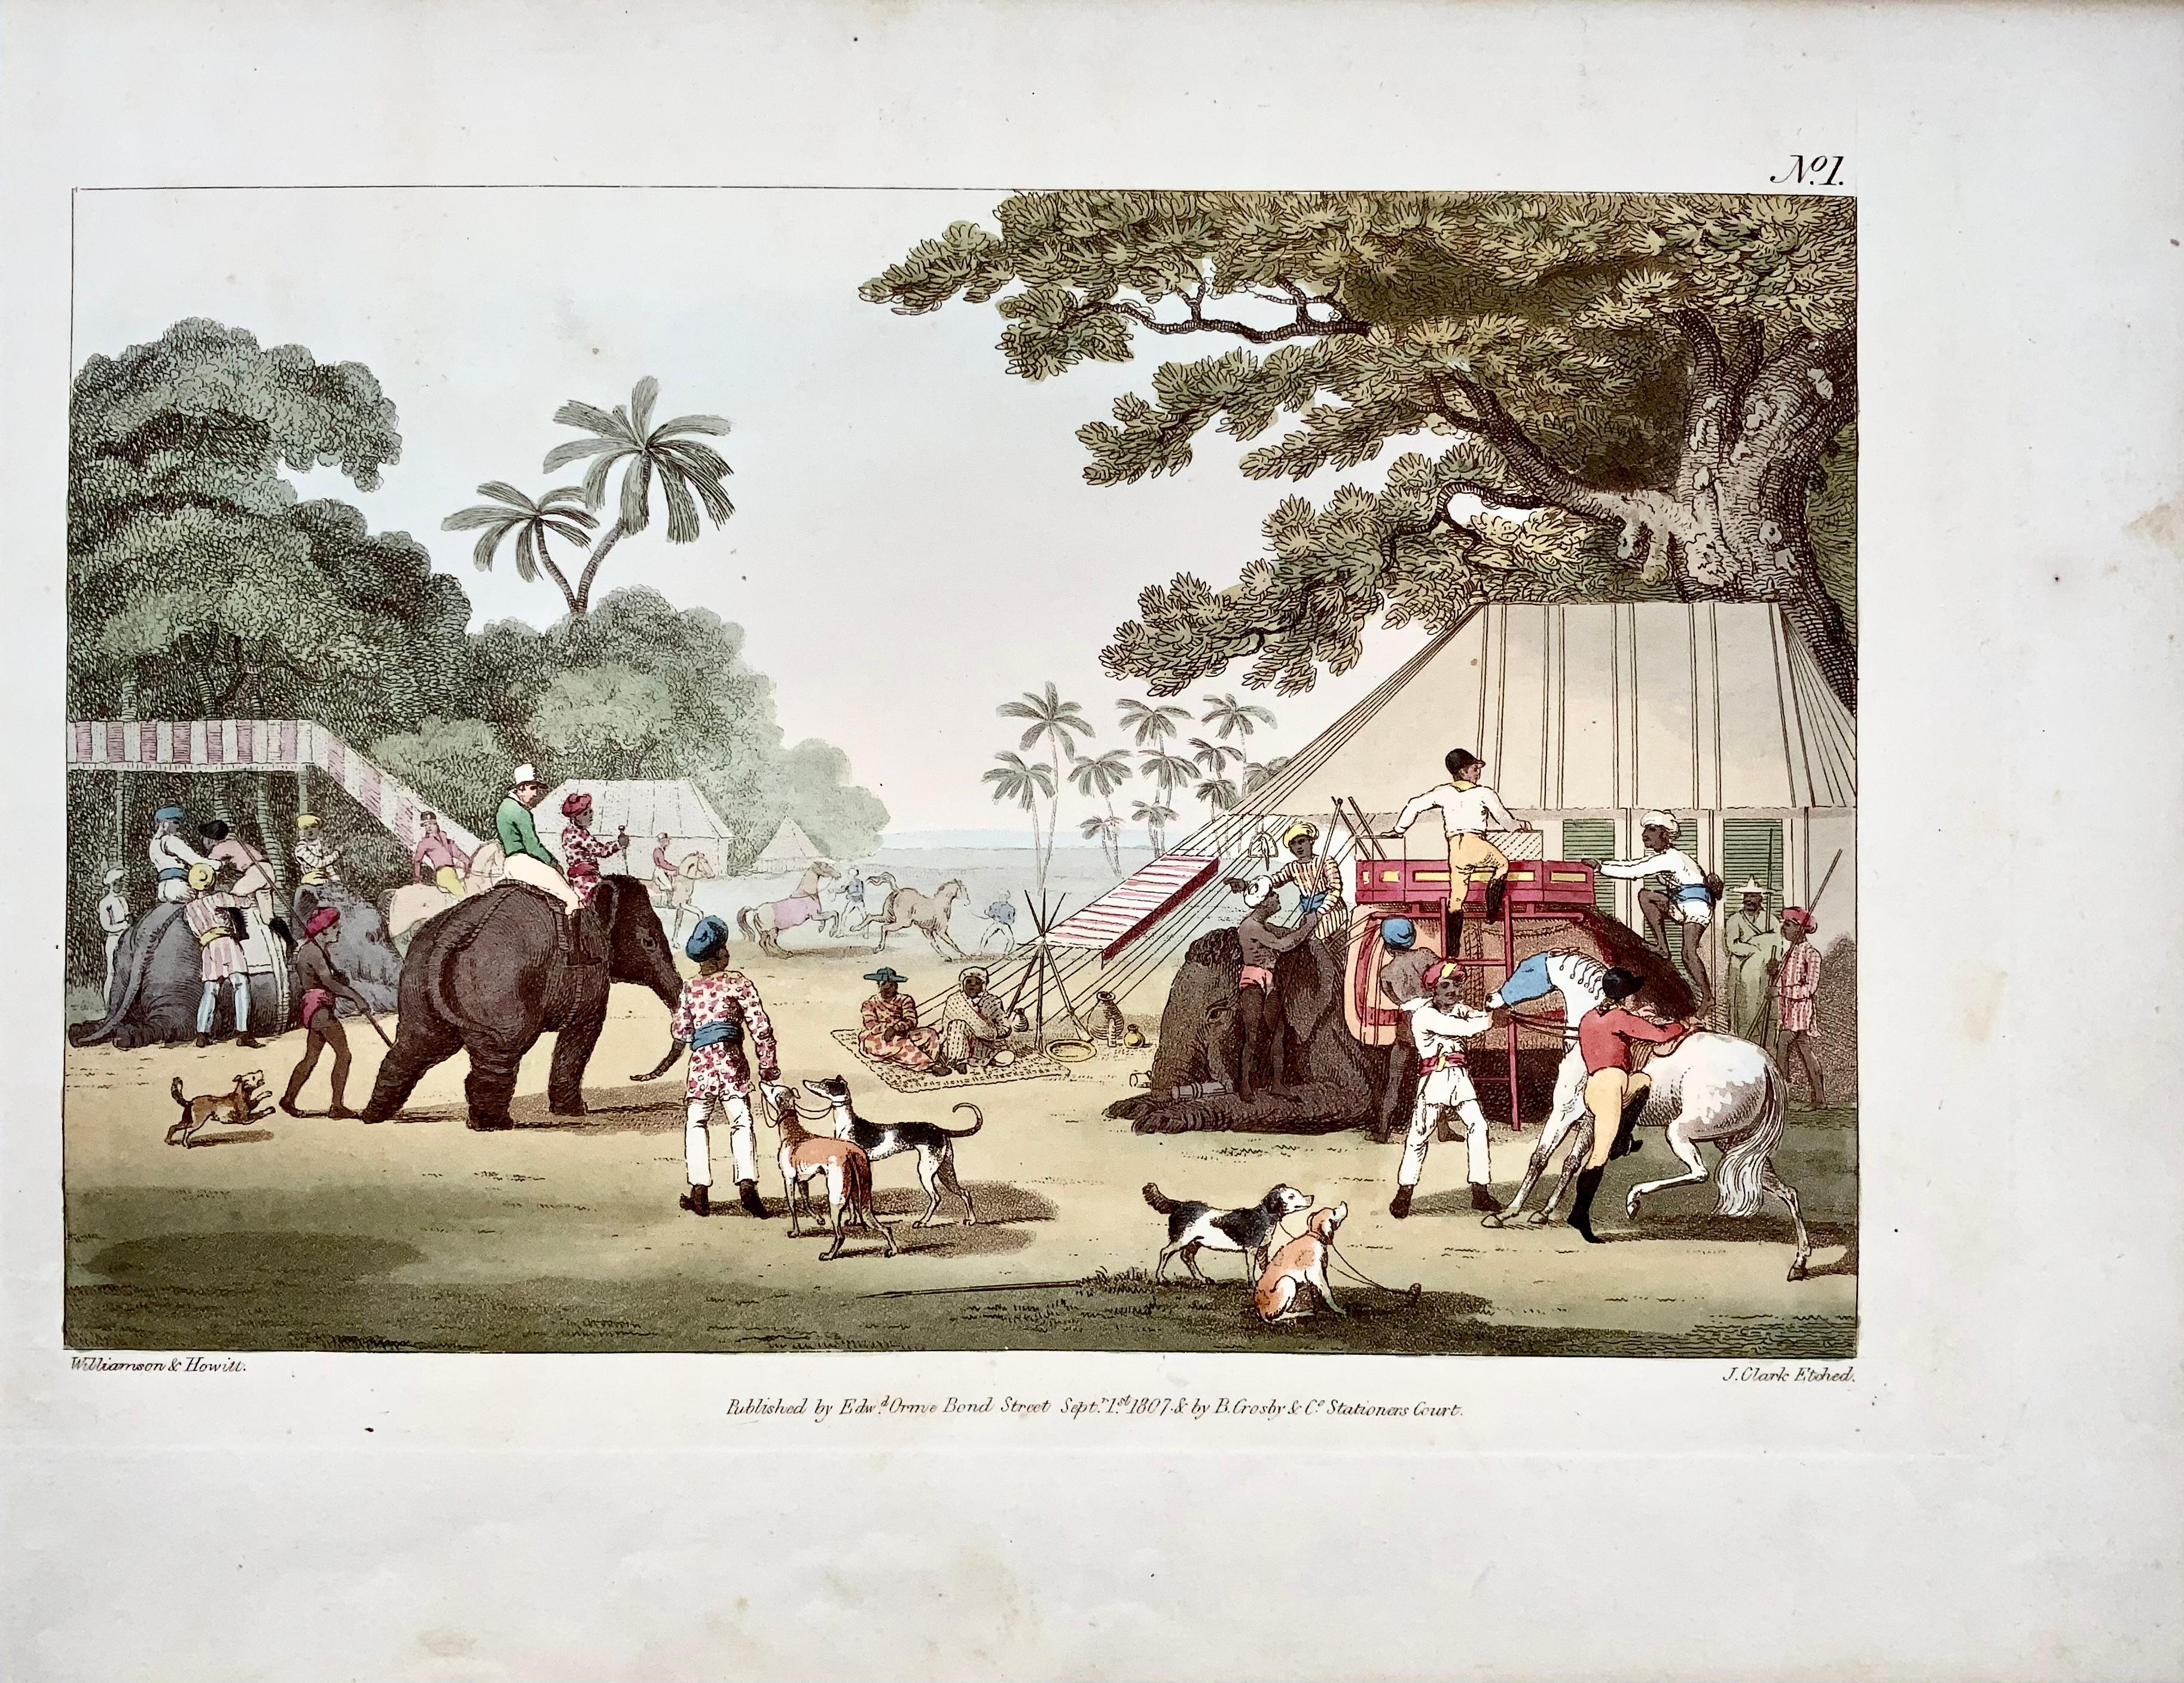 Thomas Williamson (1758-1817) and Samuel Howitt (1765-1822)

Preparing for a Tiger Hunt

From: Oriental Field Sports being a complete, detailed, and accurate description of the wild sports of the East and exhibiting, in a novel and interesting